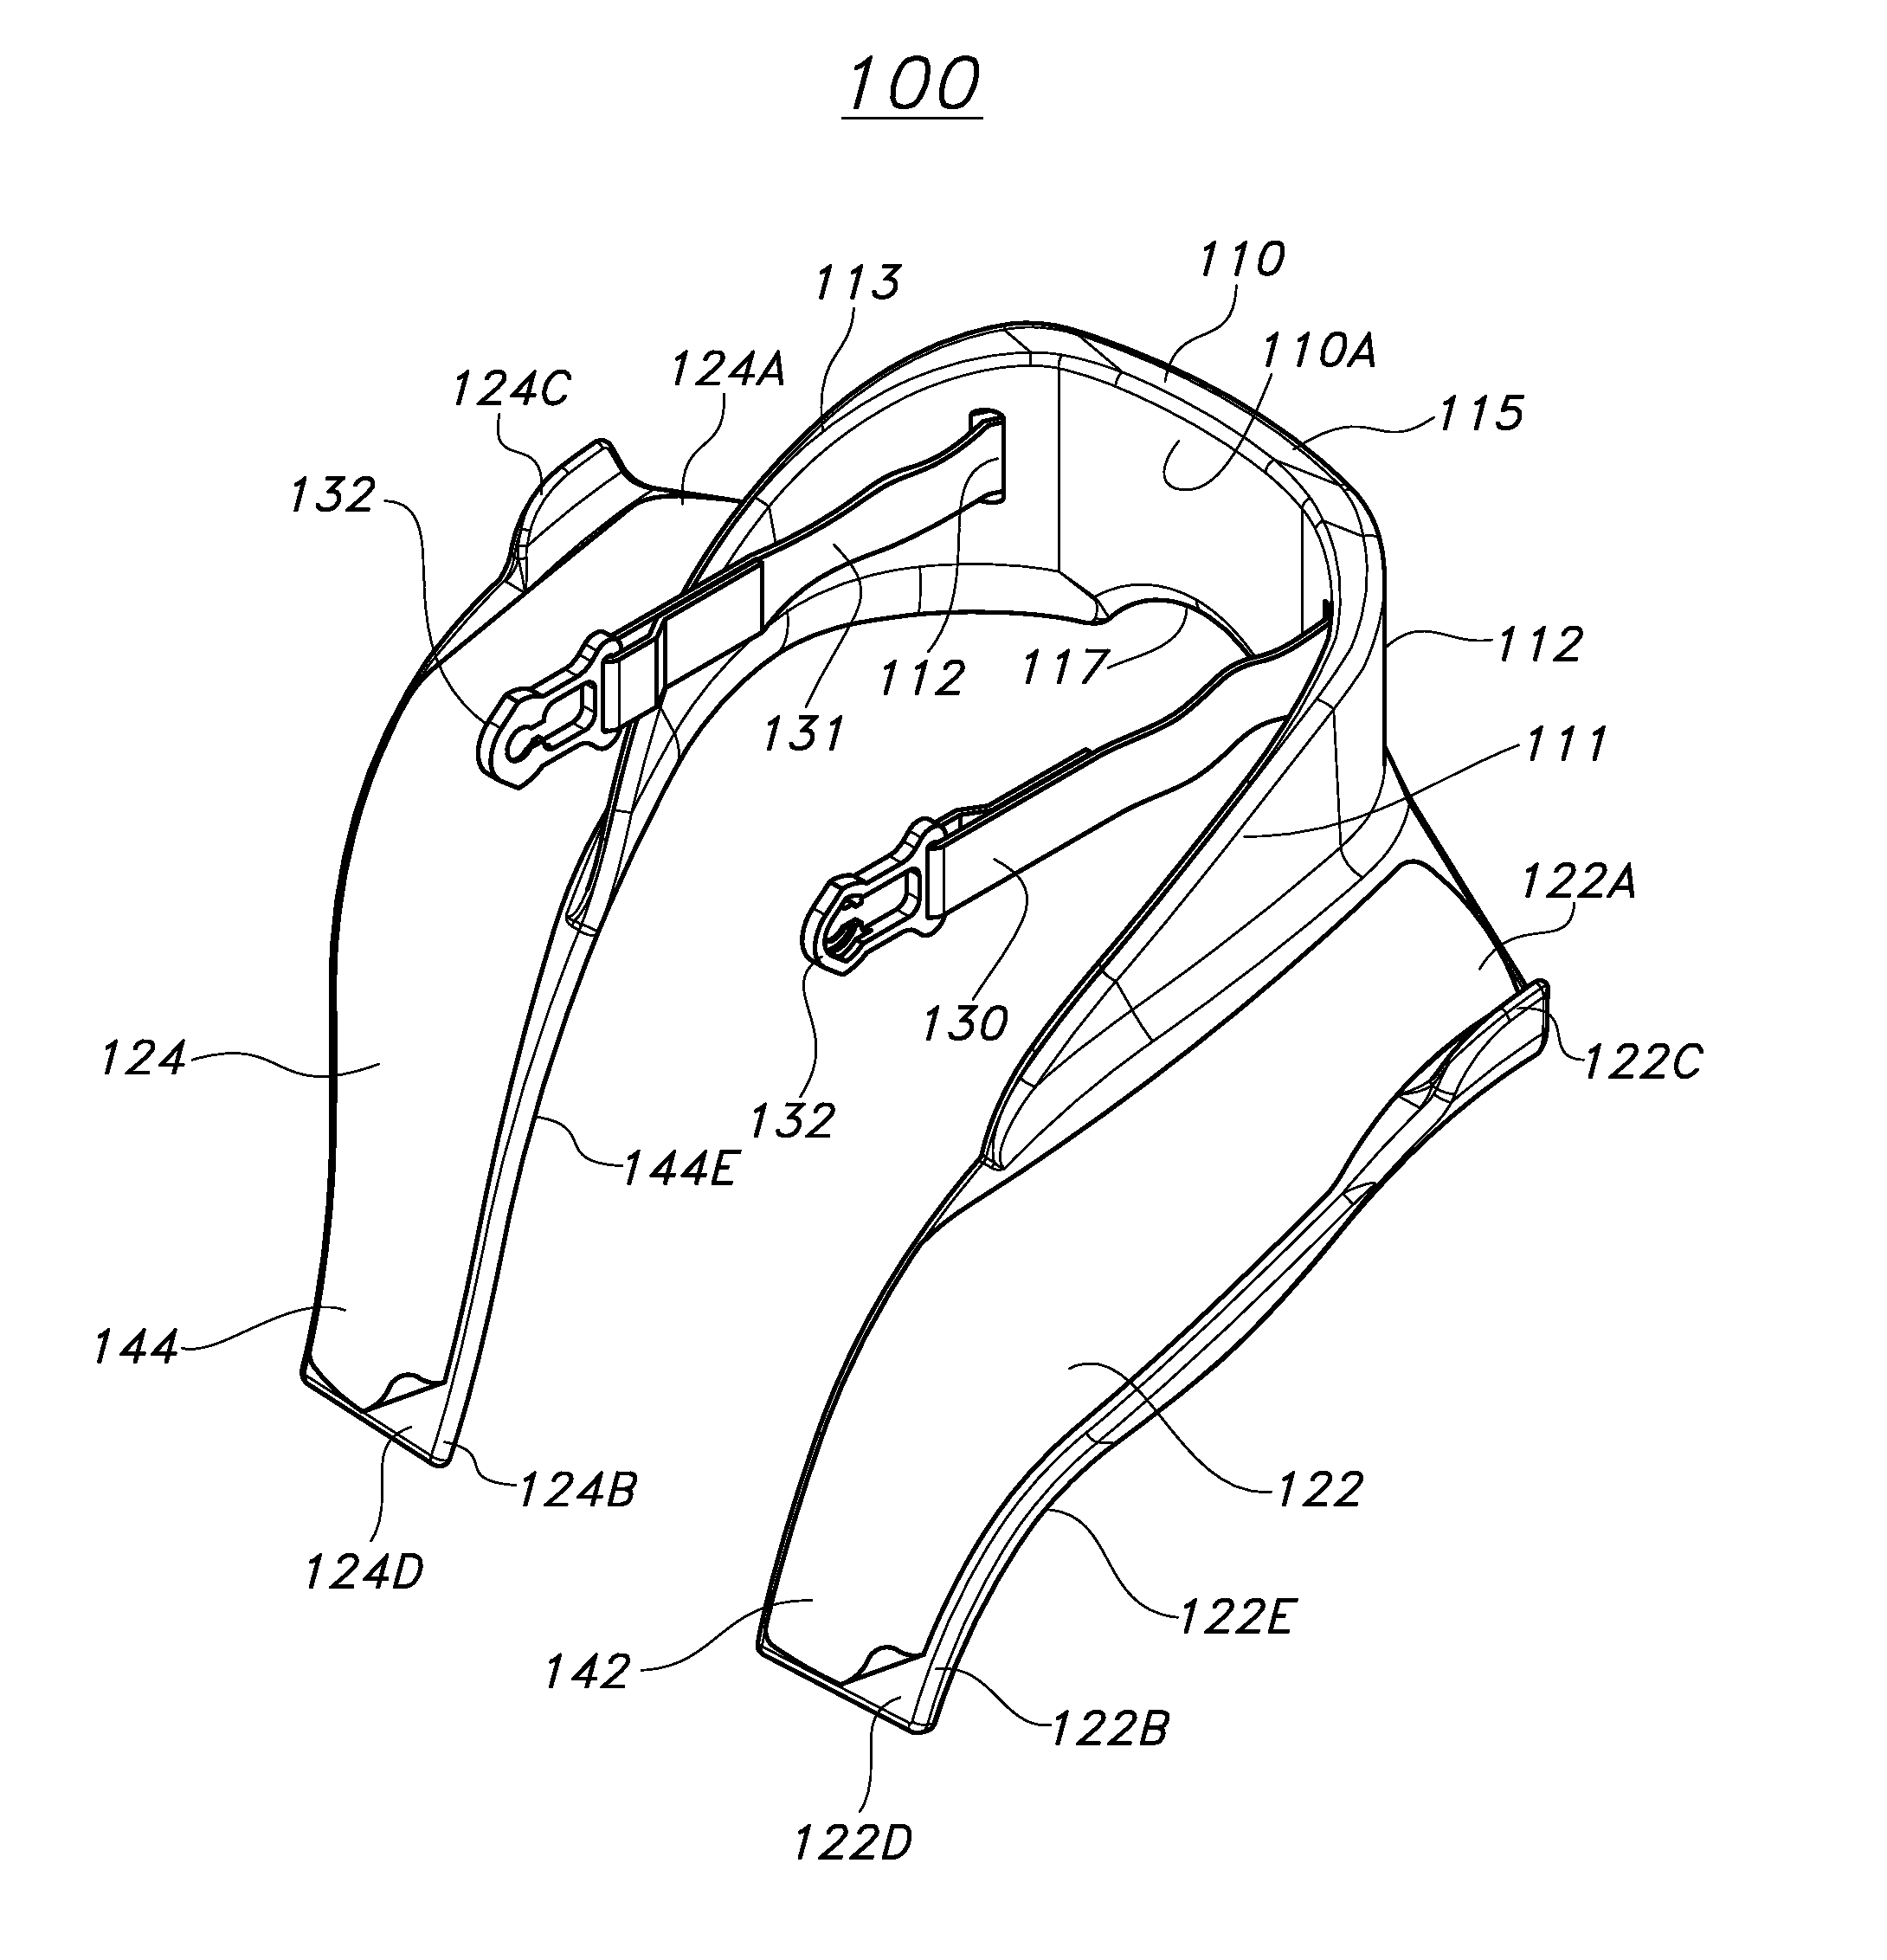 Head and neck support device with low collar